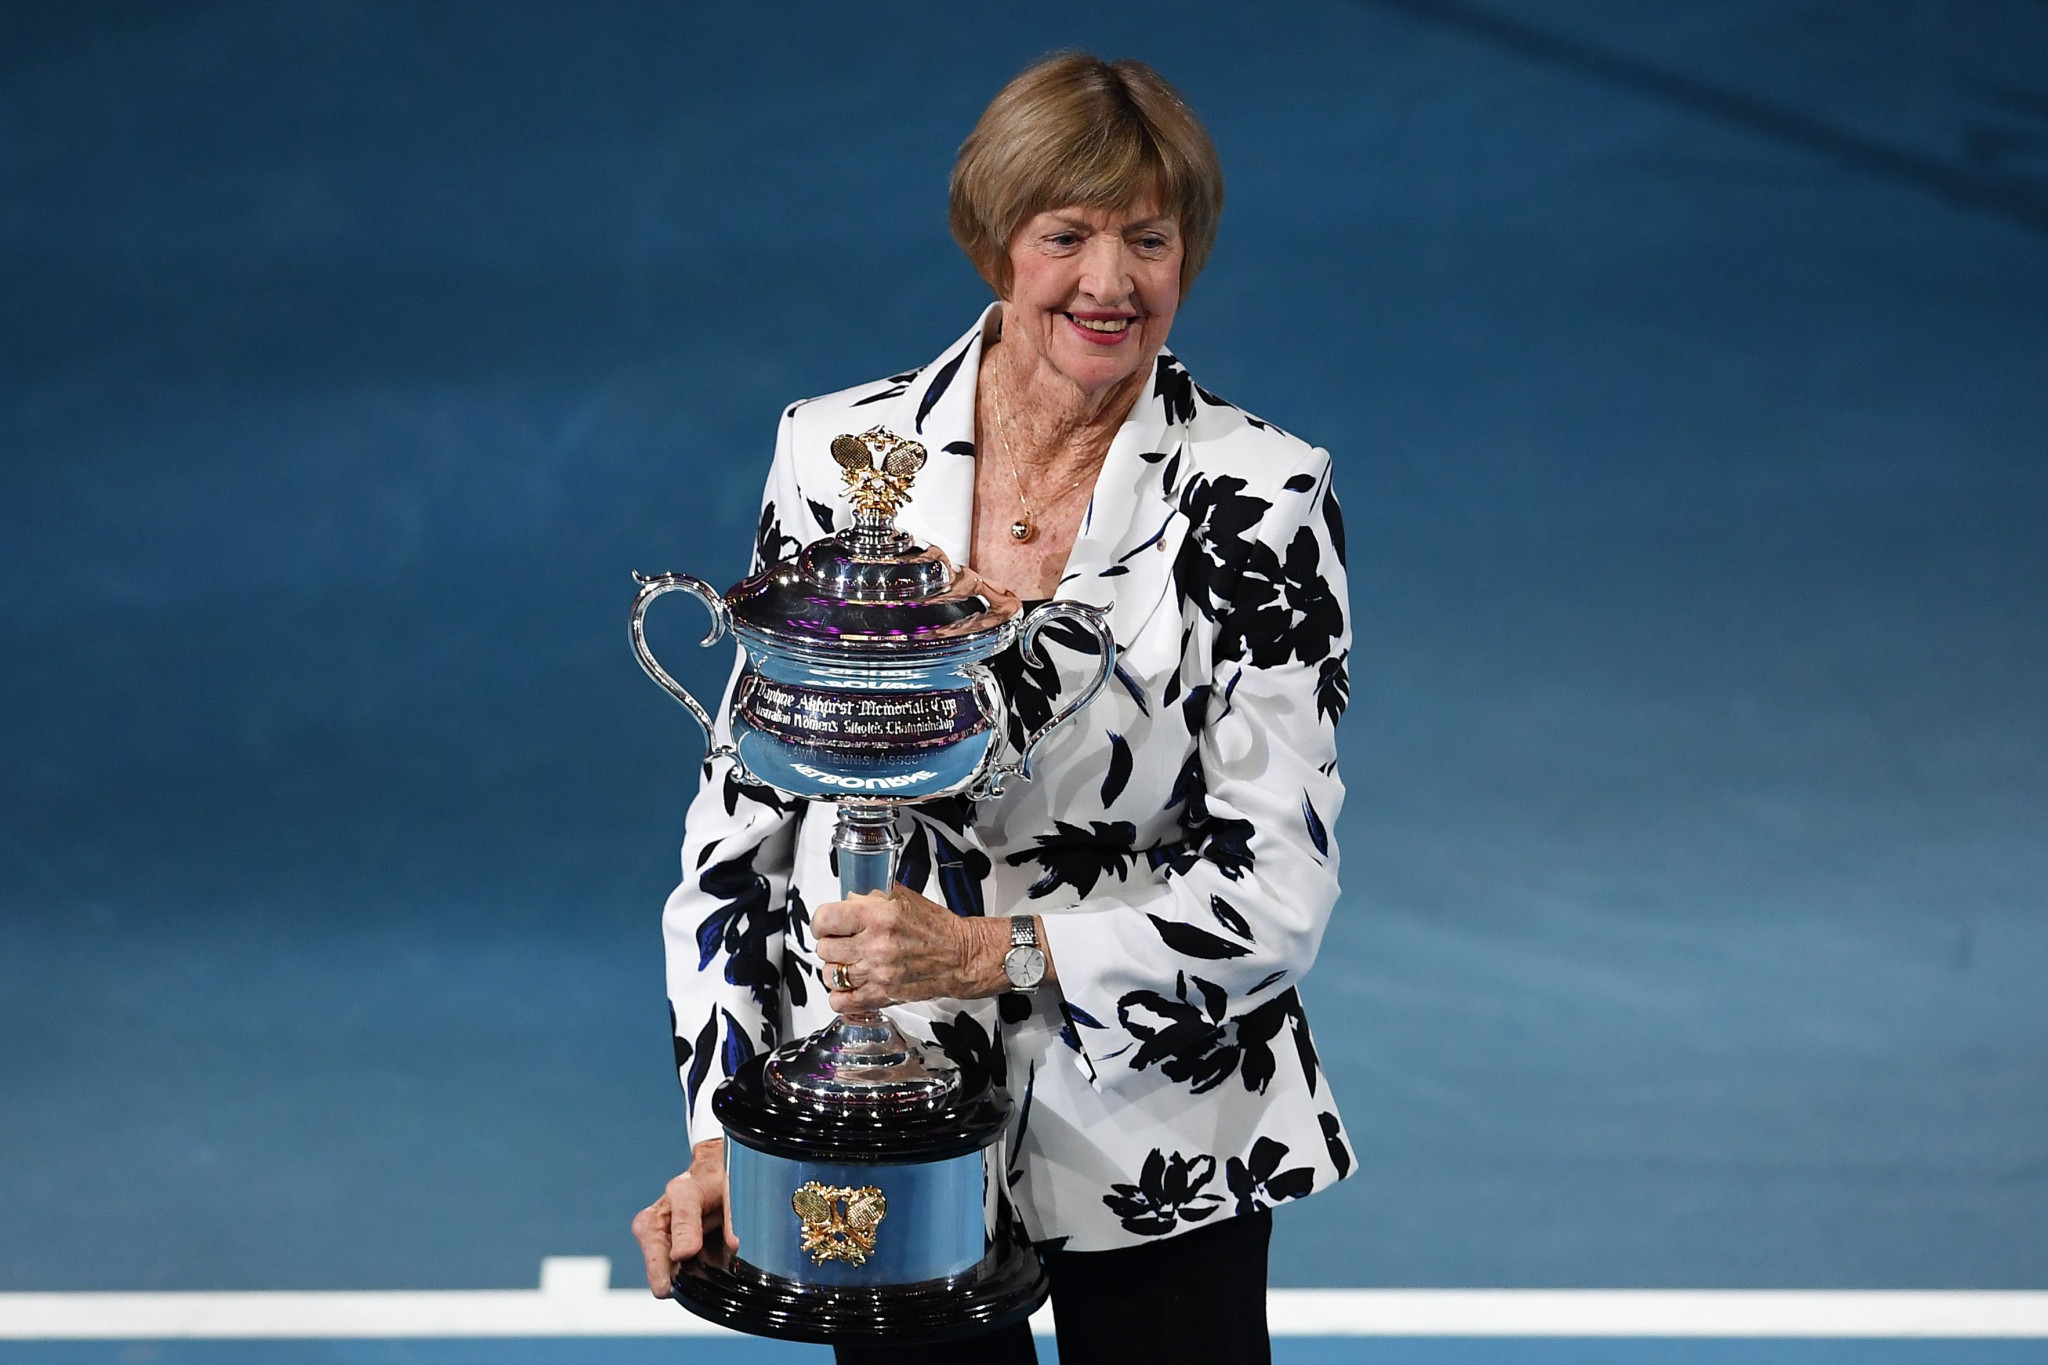 Controversial tennis champion Court presented with trophy at Australian Open